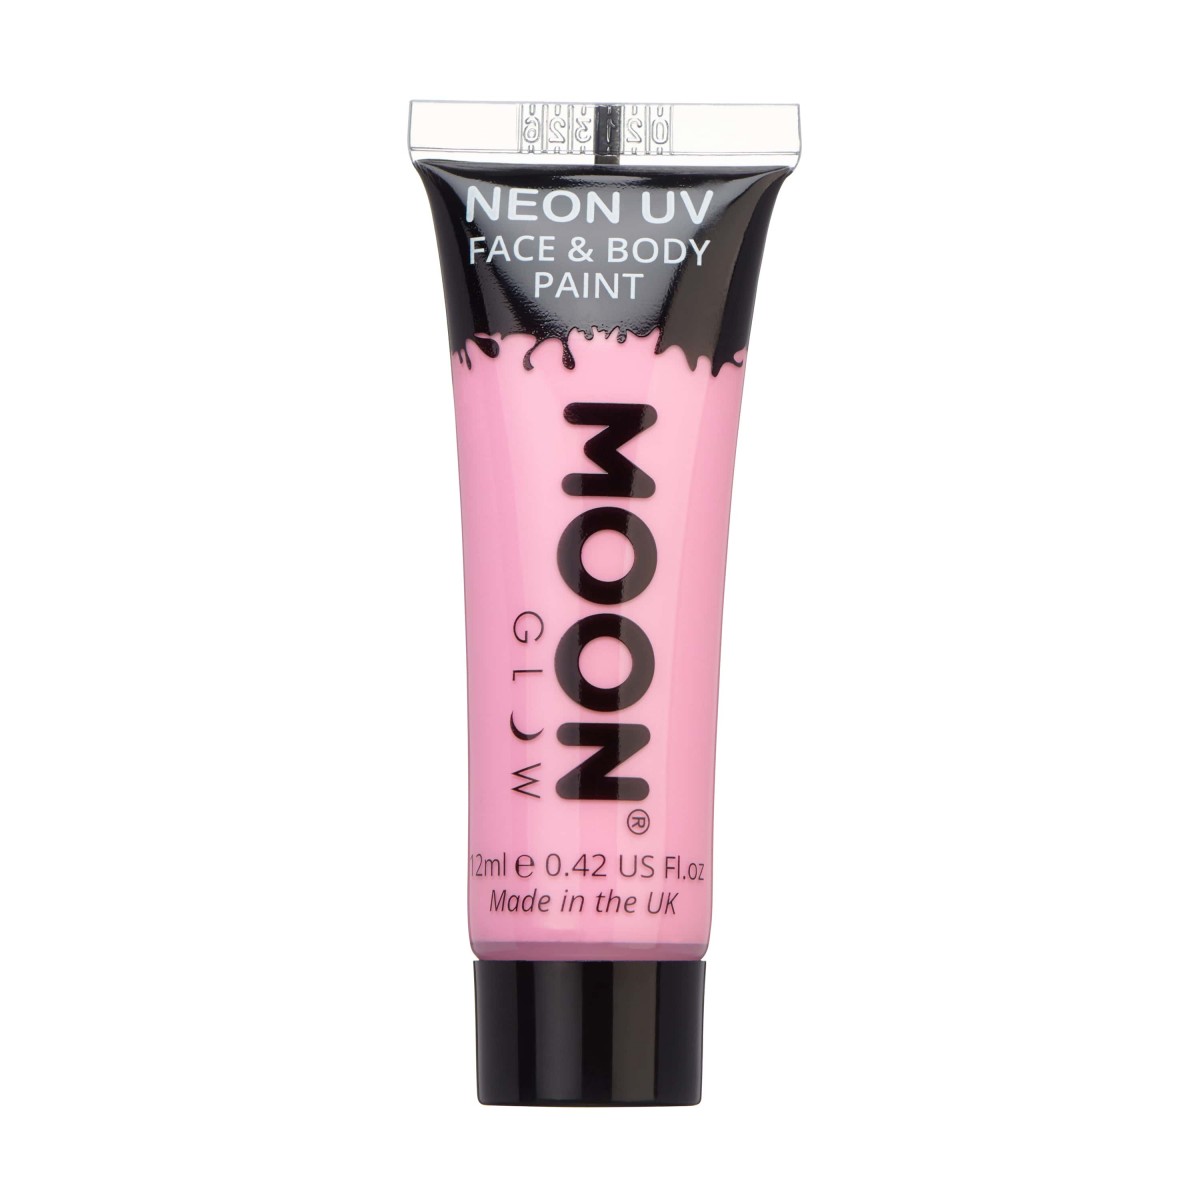 MOON CREATIONS M4 PASTEL NEON UV FACE & BODY PAINT PINK 12ml